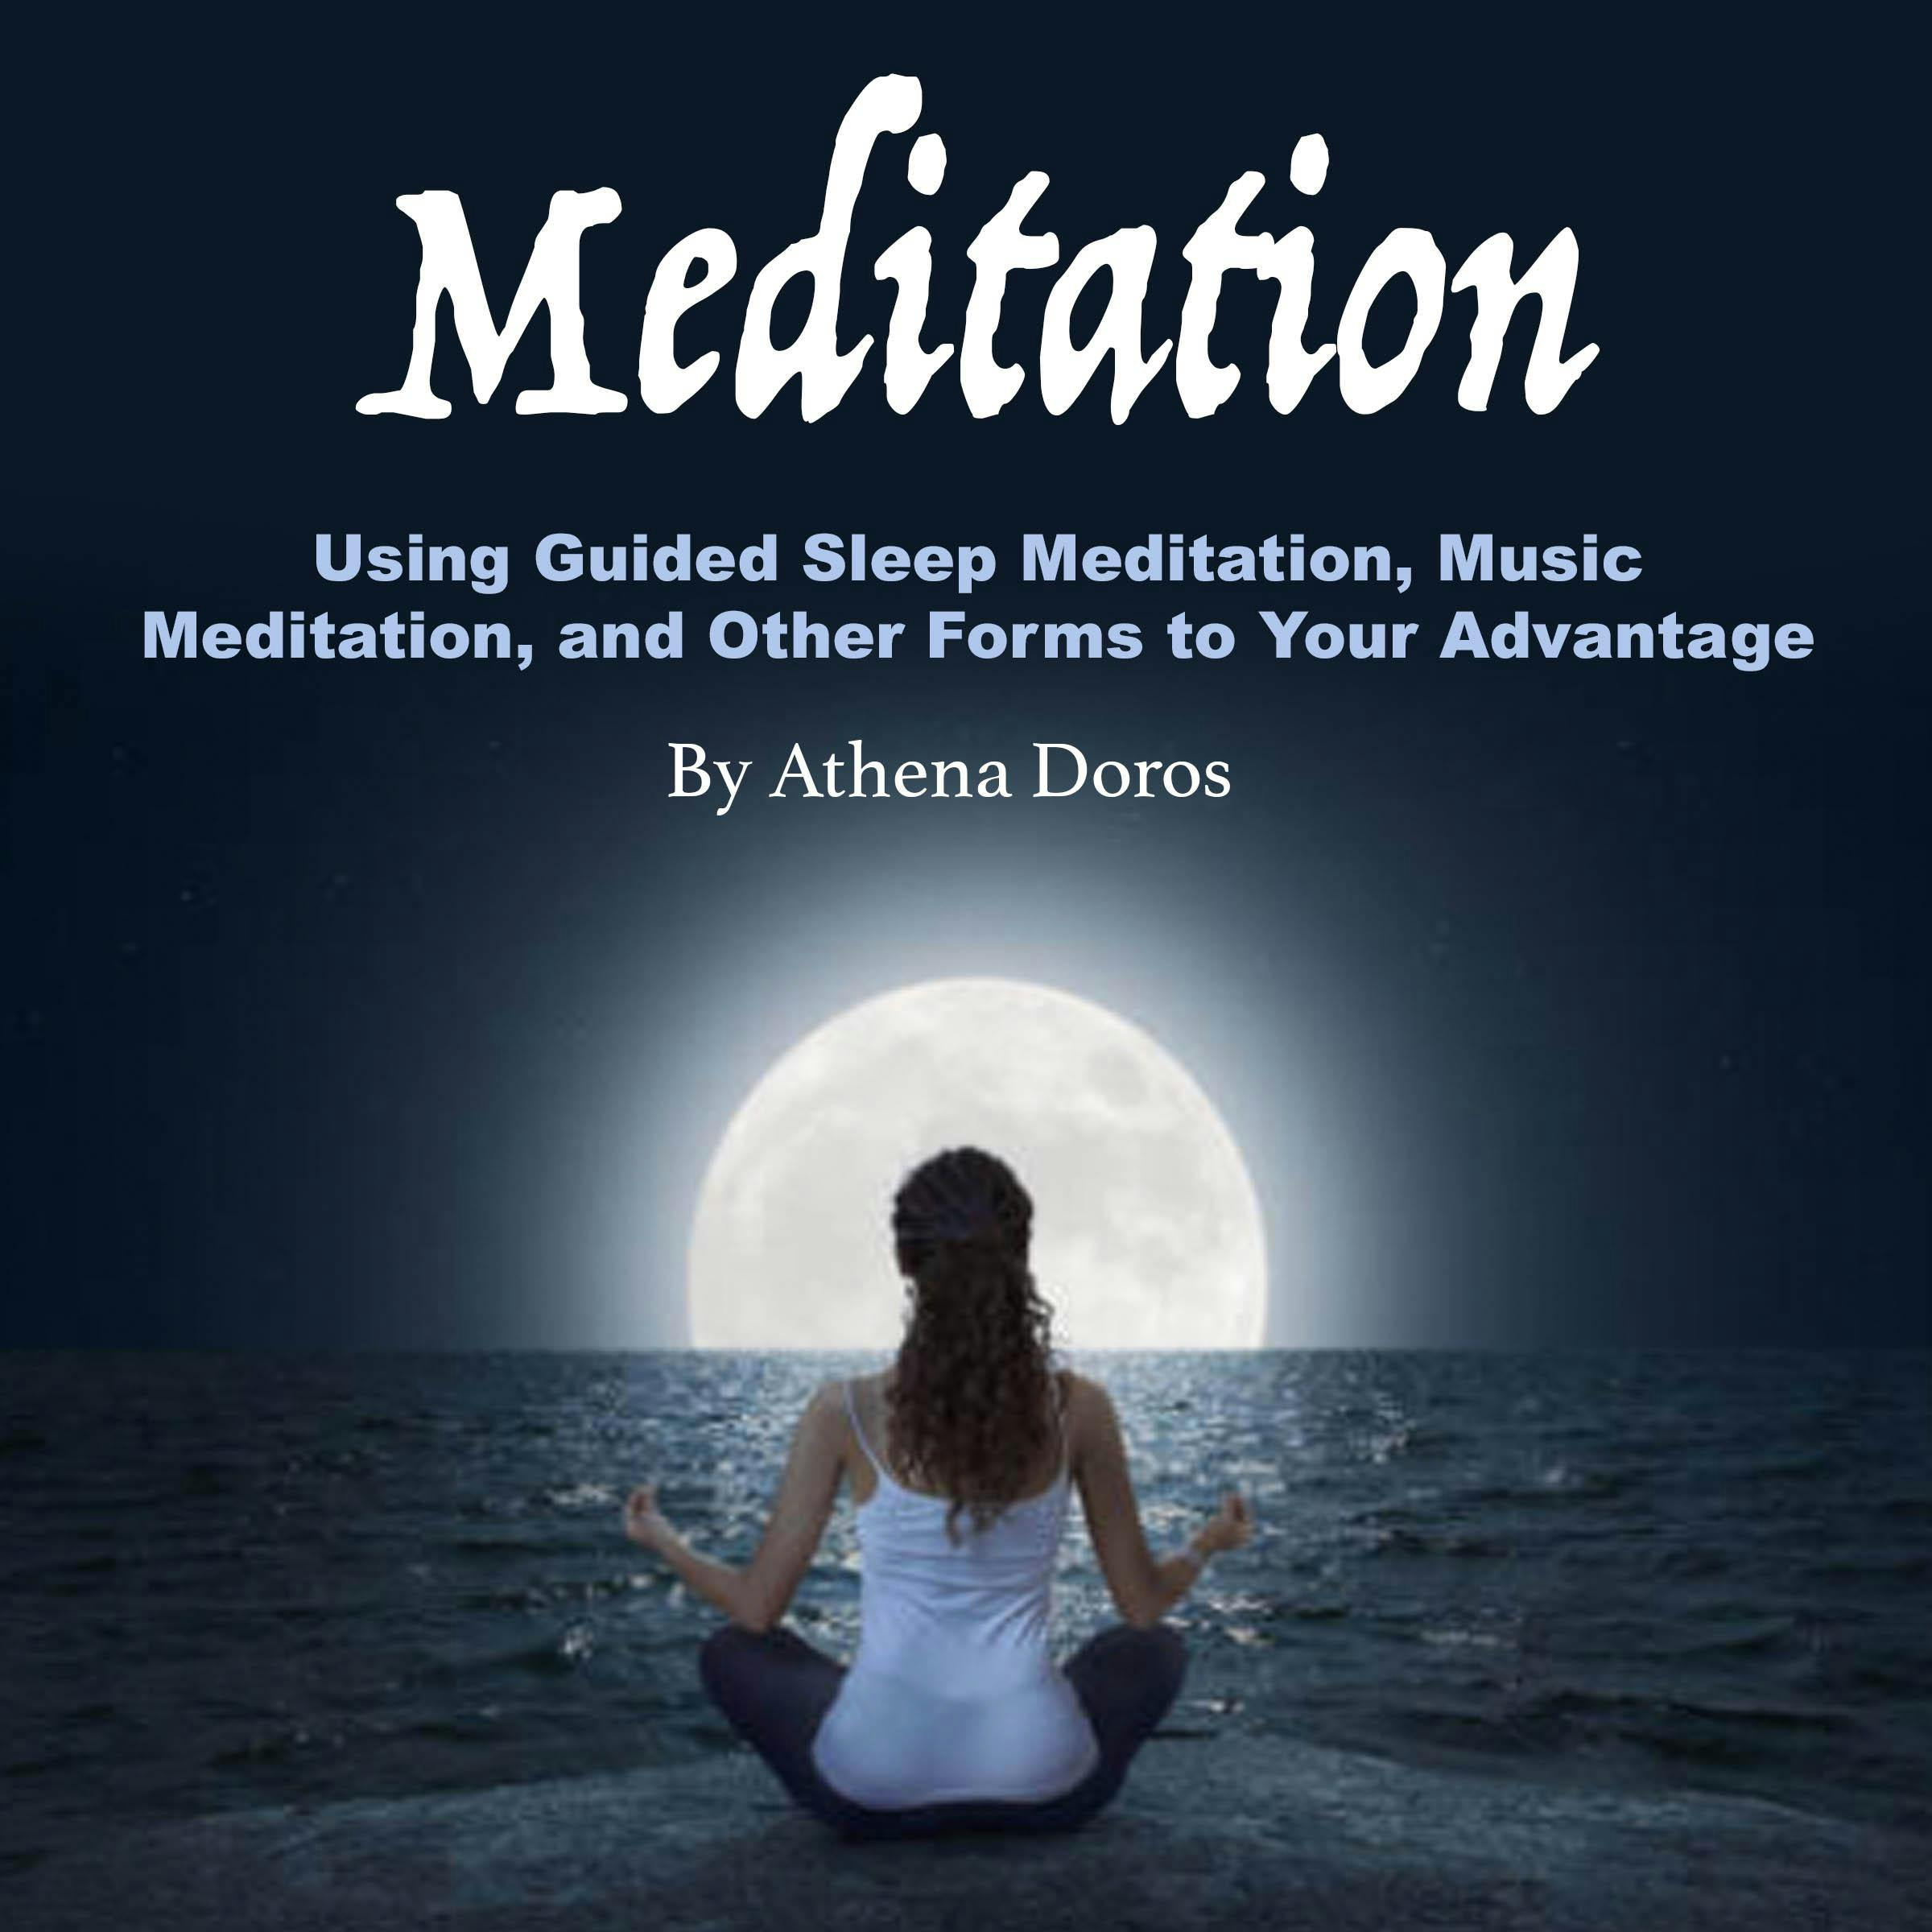 Meditation: Using Guided Sleep Meditation, Music Meditation, and Other Forms to Your Advantage - Athena Doros